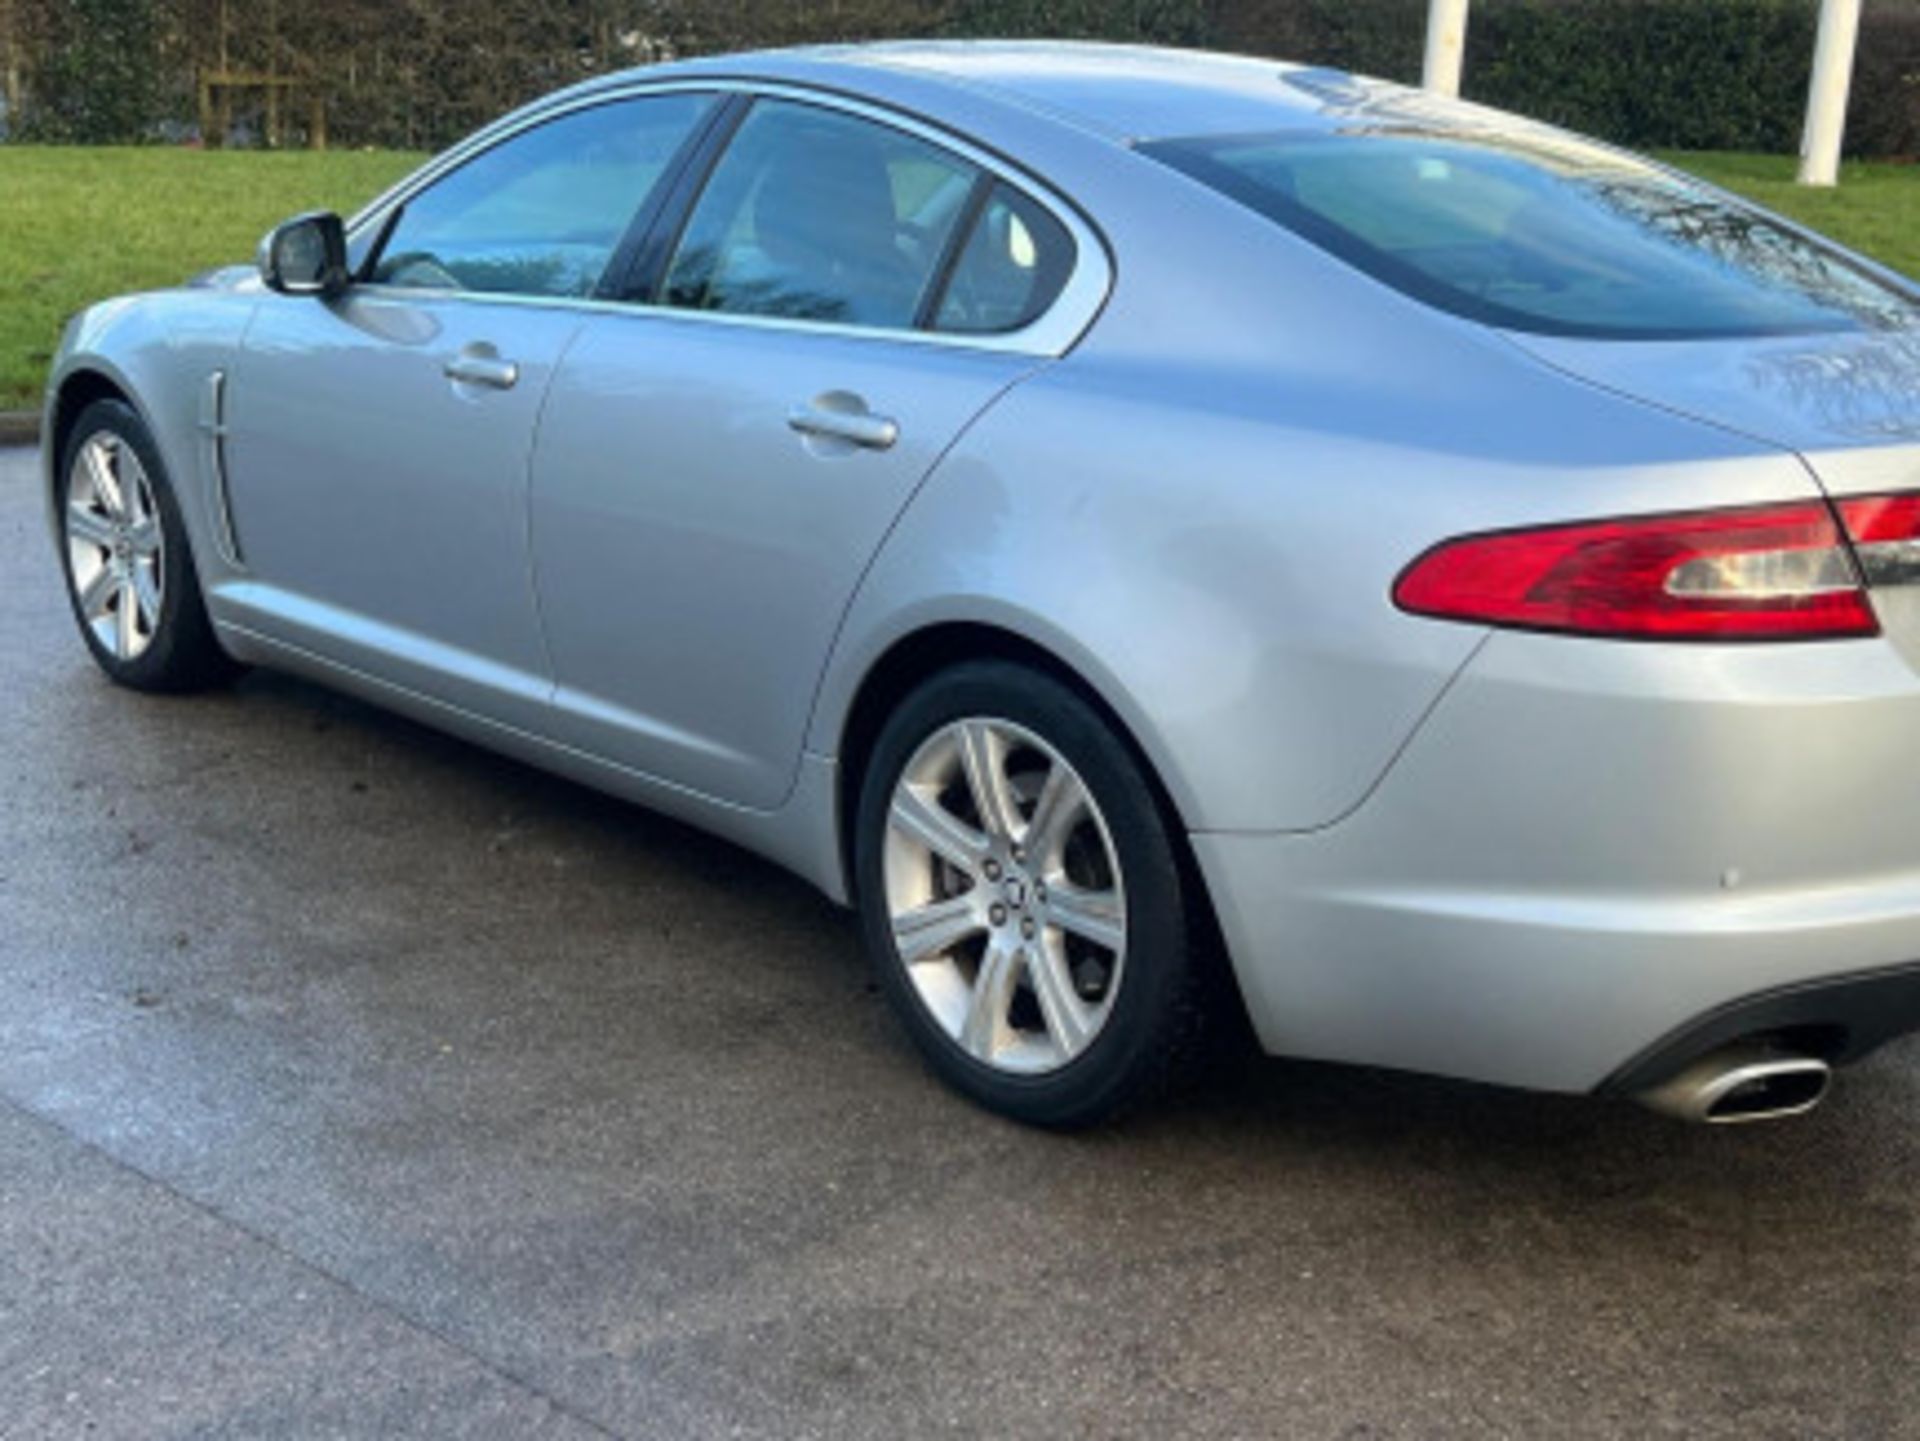 LUXURIOUS JAGUAR XF 3.0D V6 LUXURY 4DR AUTOMATIC SALOON >>--NO VAT ON HAMMER--<< - Image 47 of 118